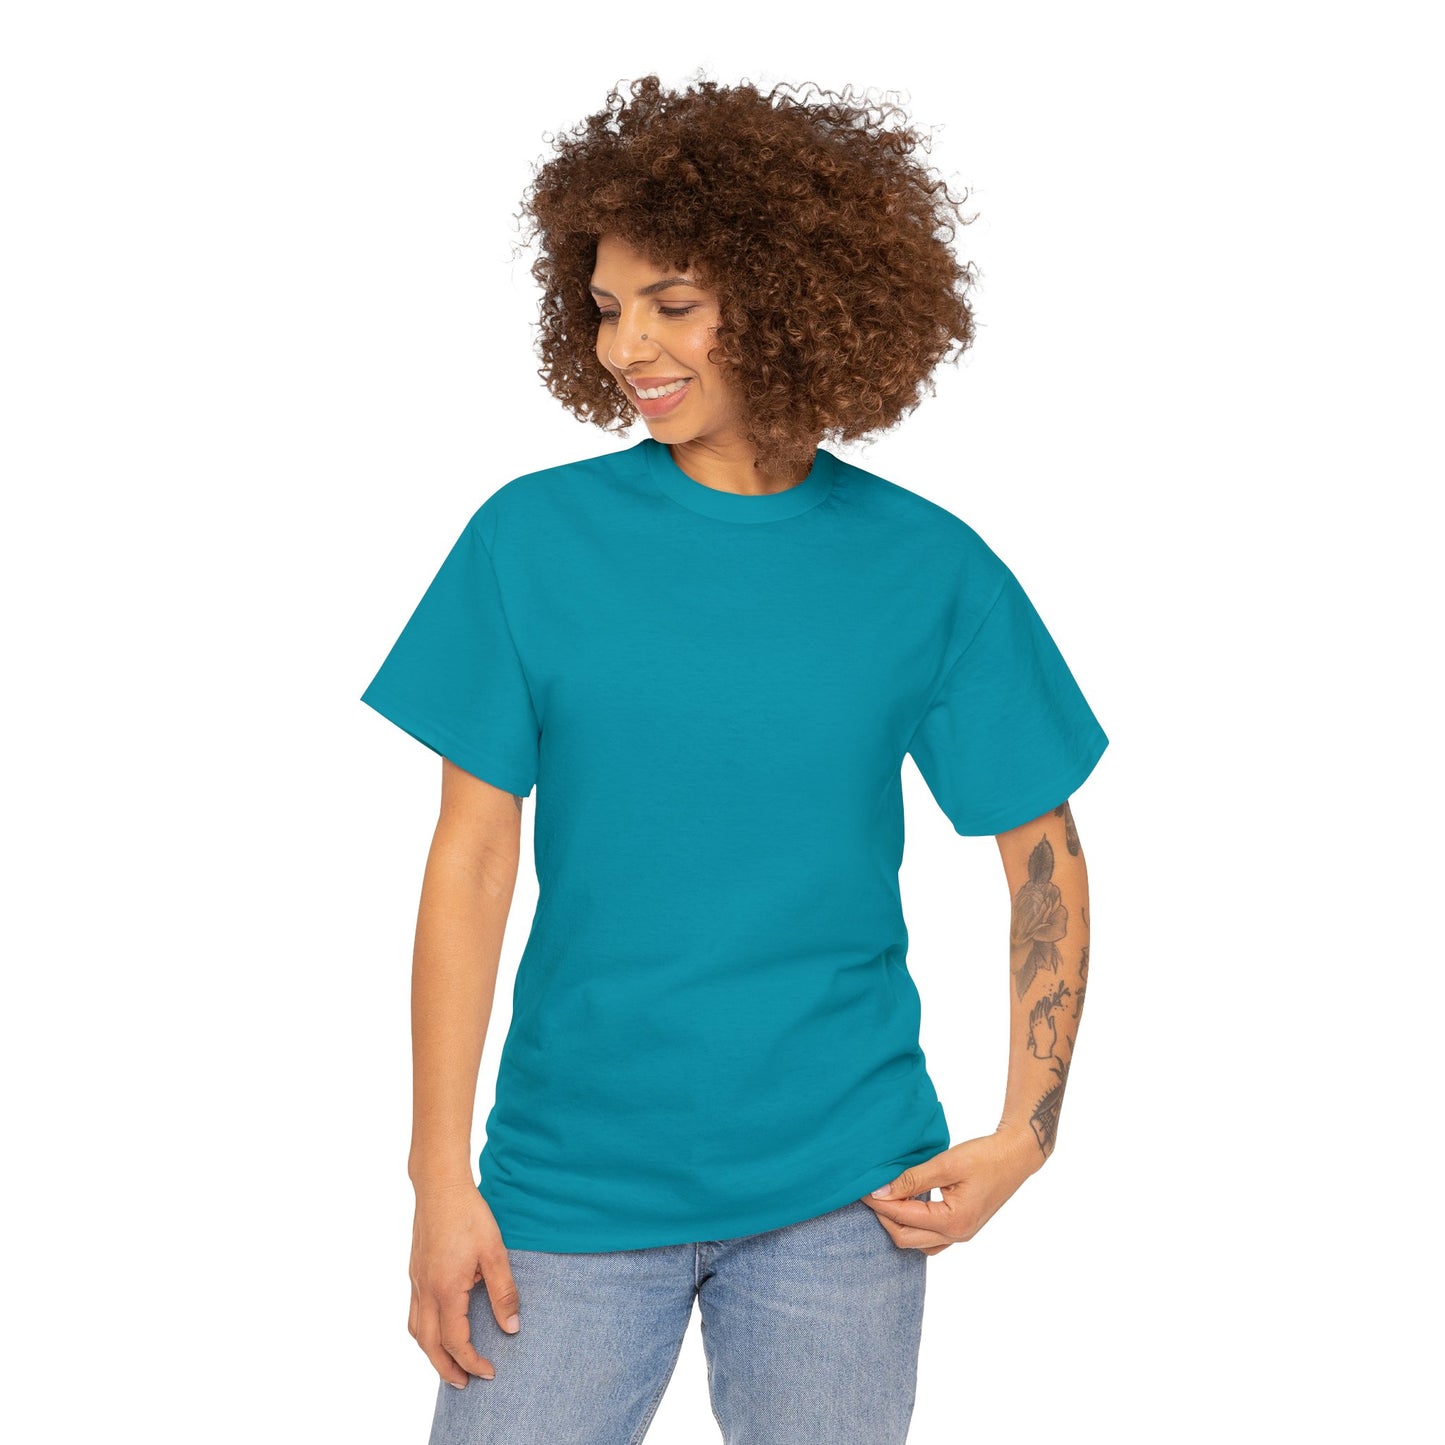 TOPOCK SMALL TOWN ON BACK  Unisex Heavy Cotton Tee